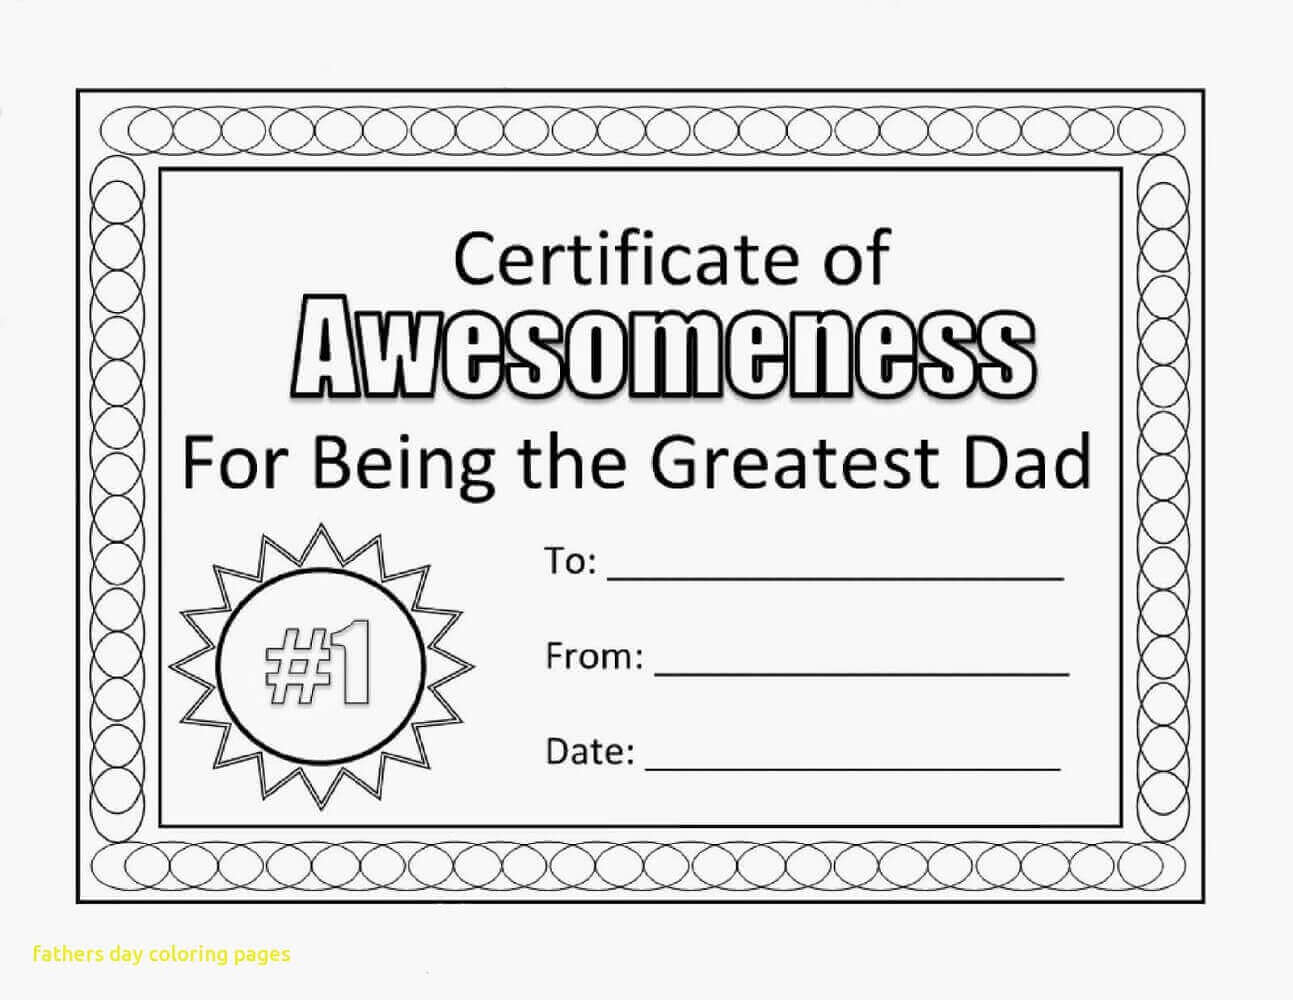 Fathers Day Printable Award Certificate